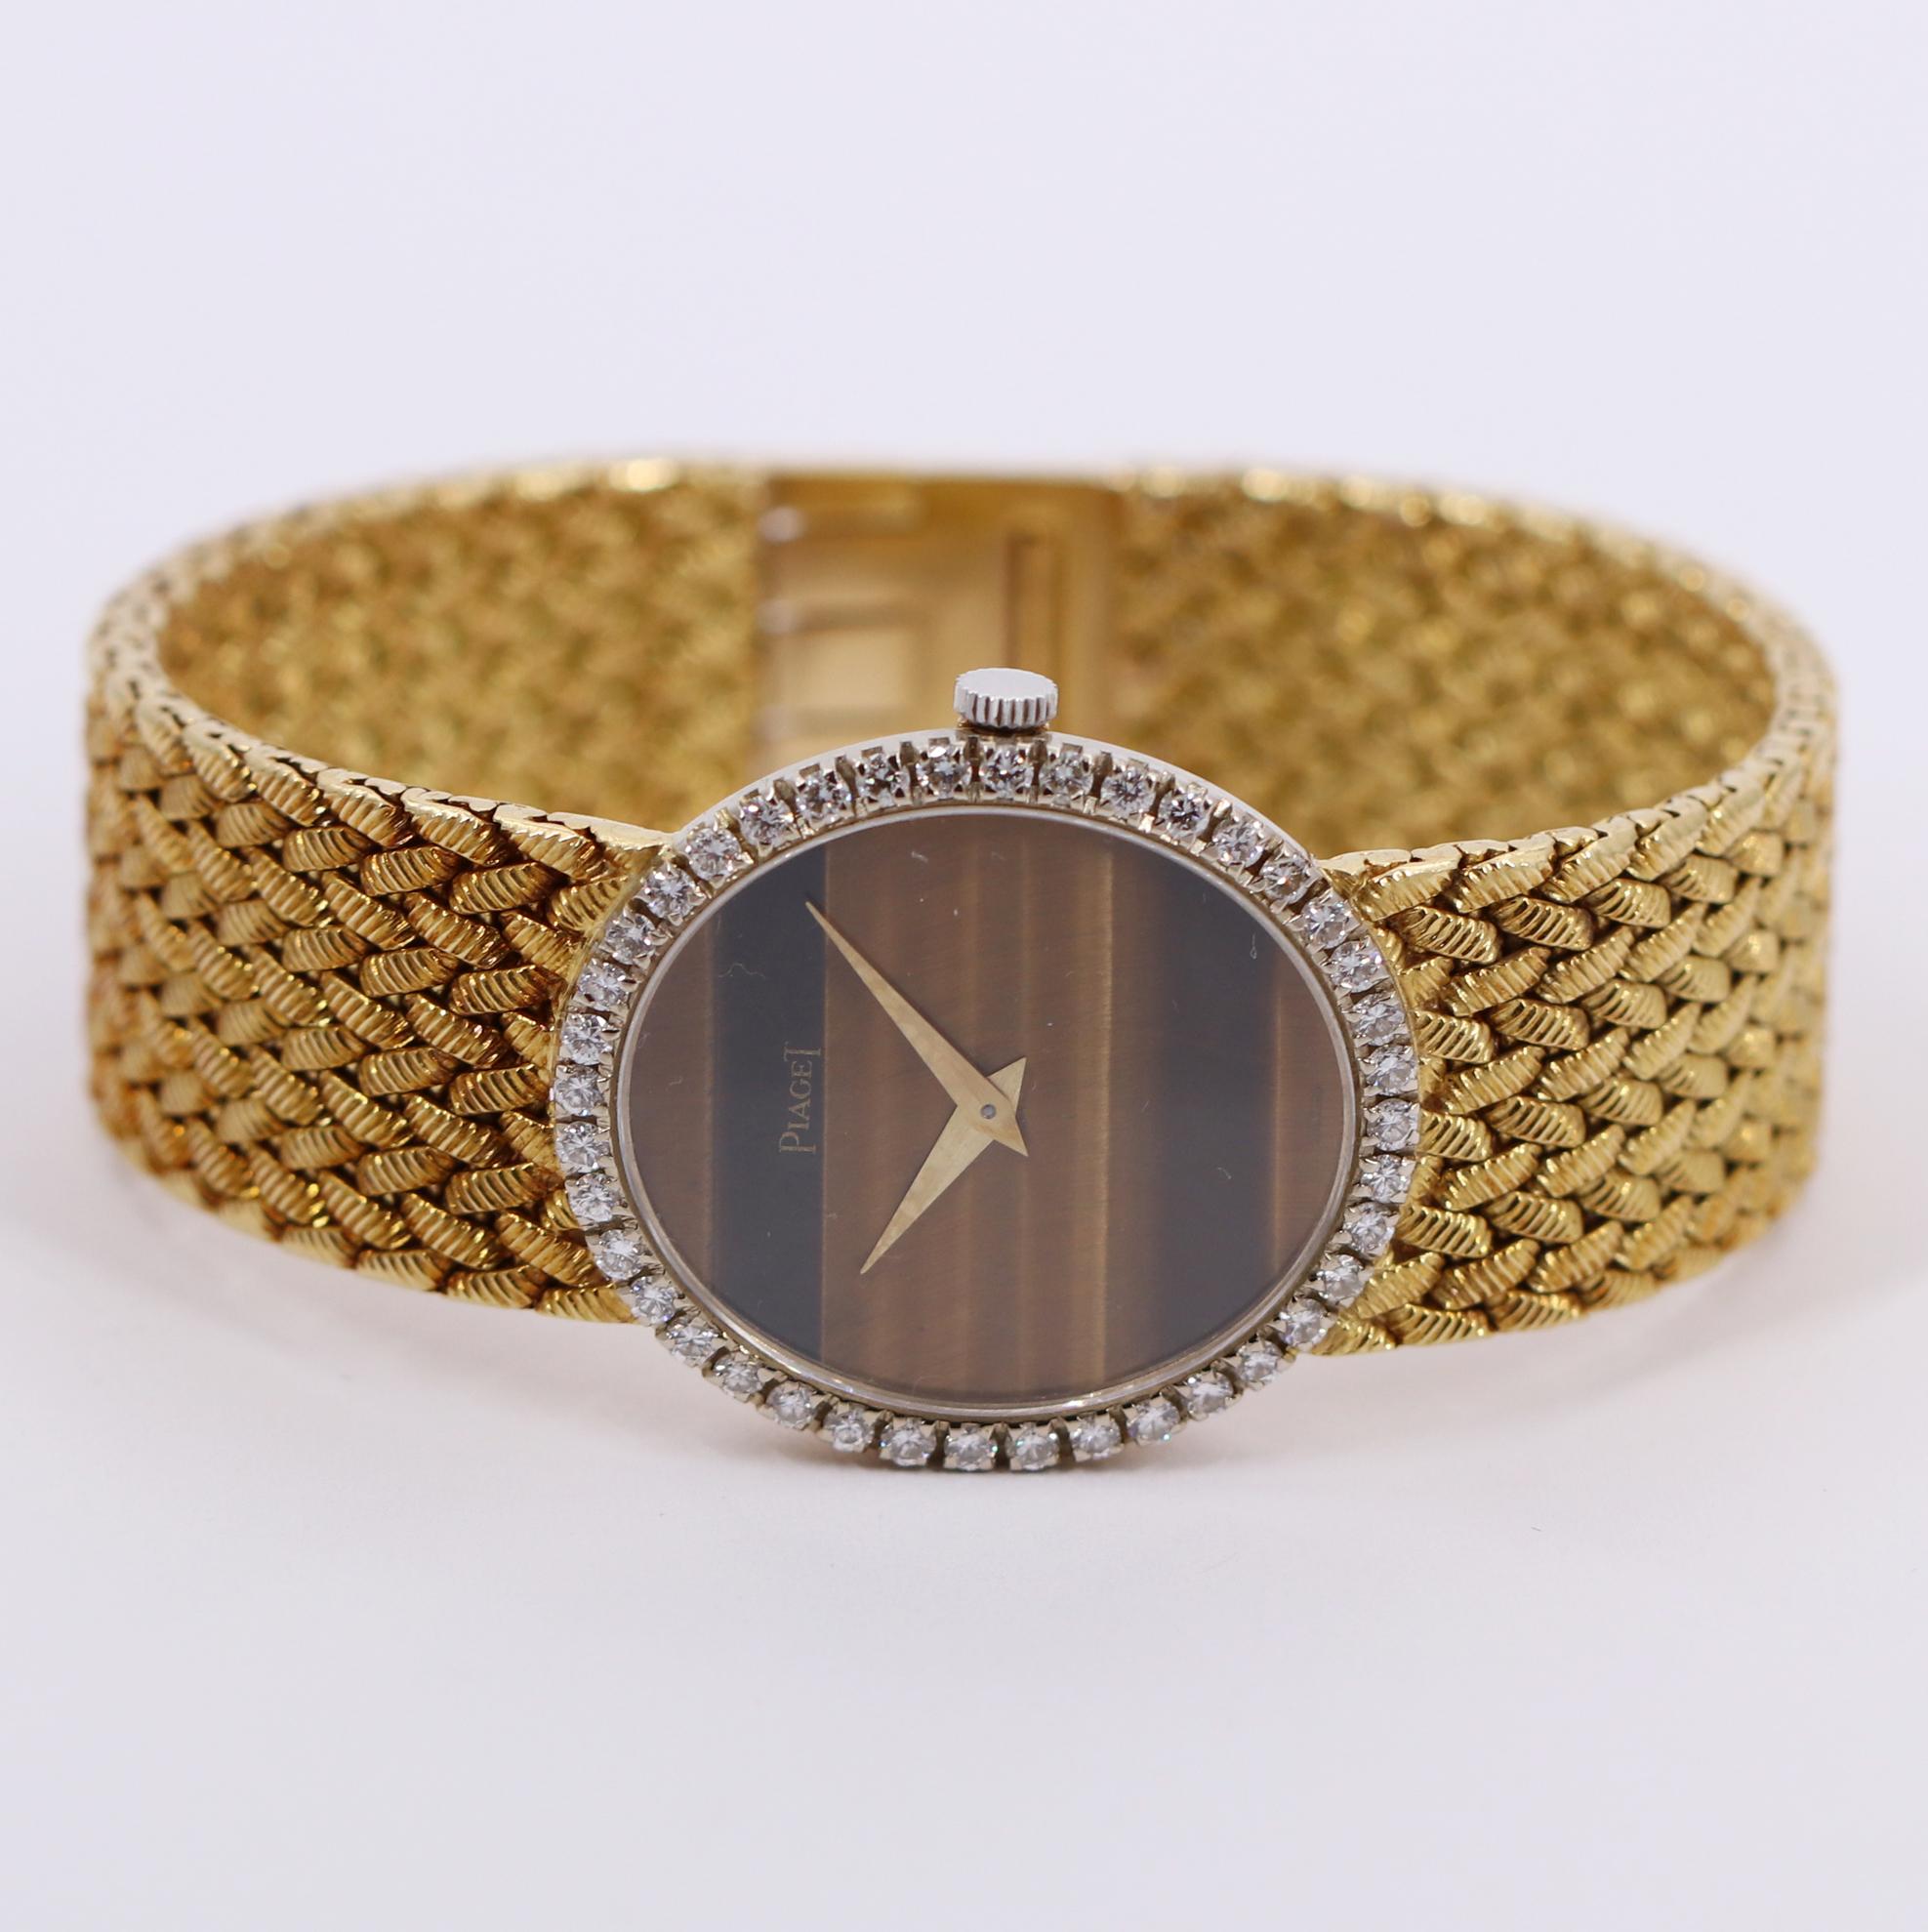 Women's Yellow Gold Piaget Watch with Diamond Bezel and Oval Tiger's Eye Dial